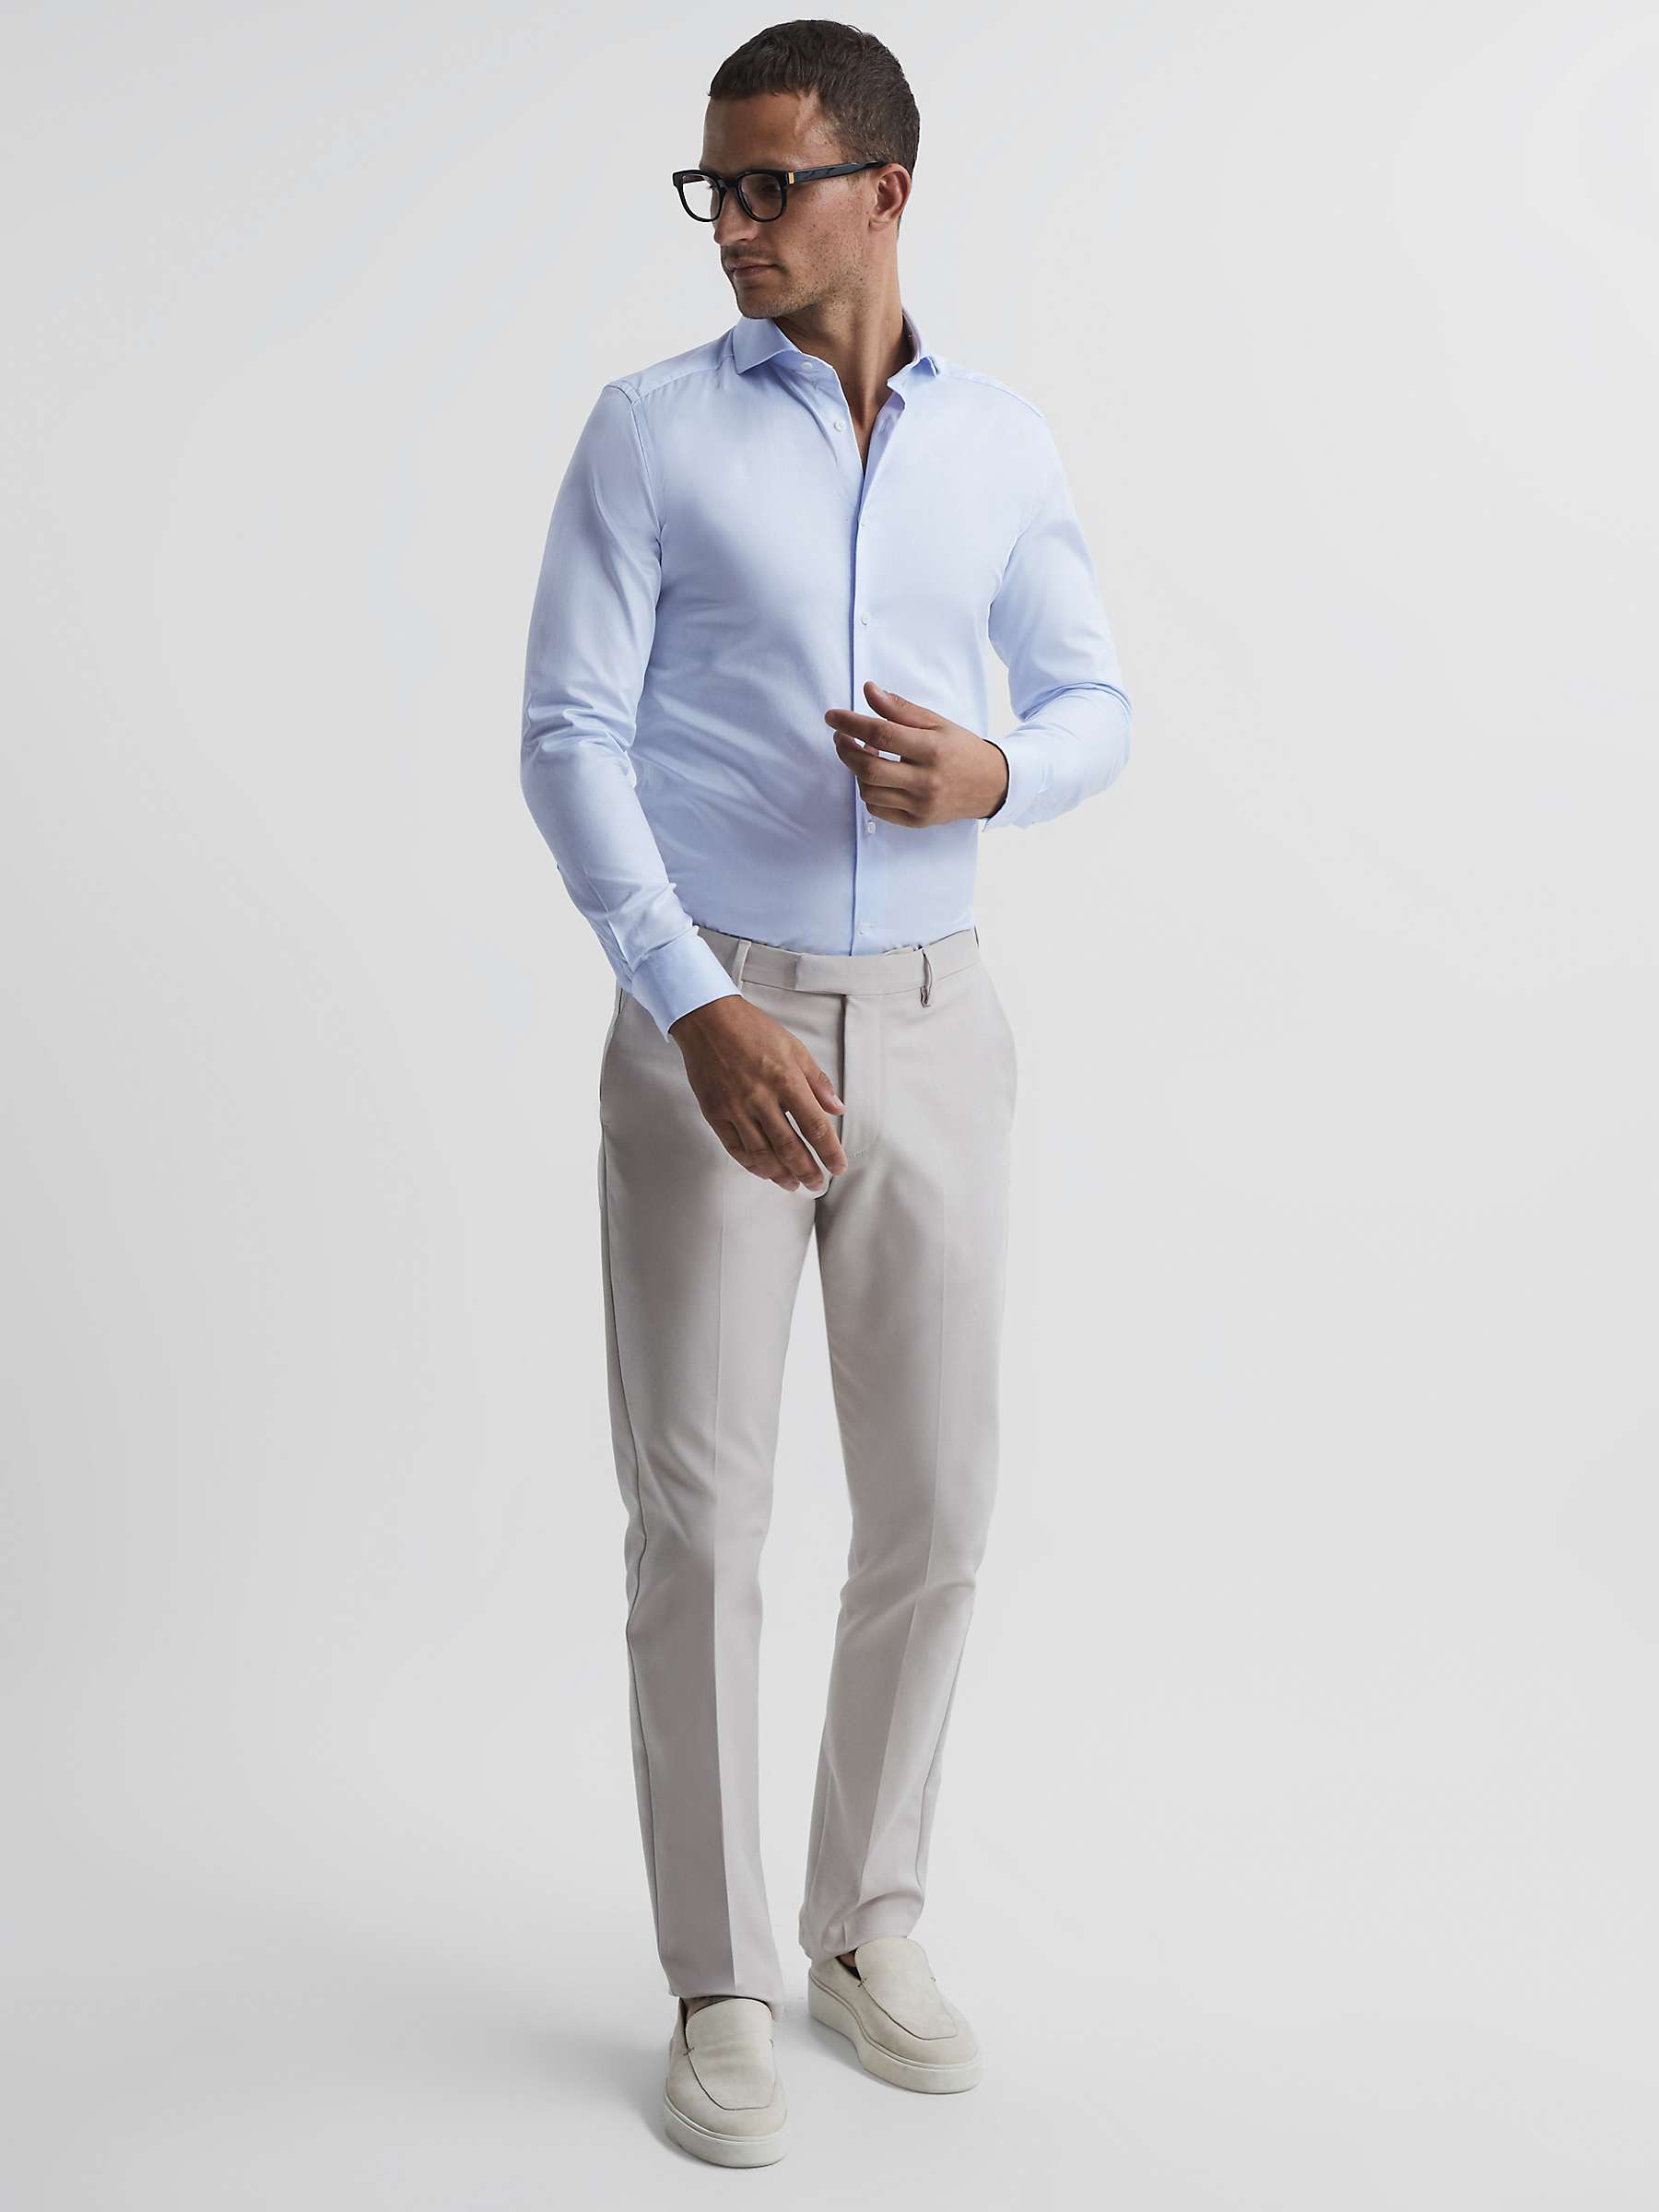 Buy Reiss Storm Cotton Twill Slim Fit Long Sleeve Shirt Online at johnlewis.com